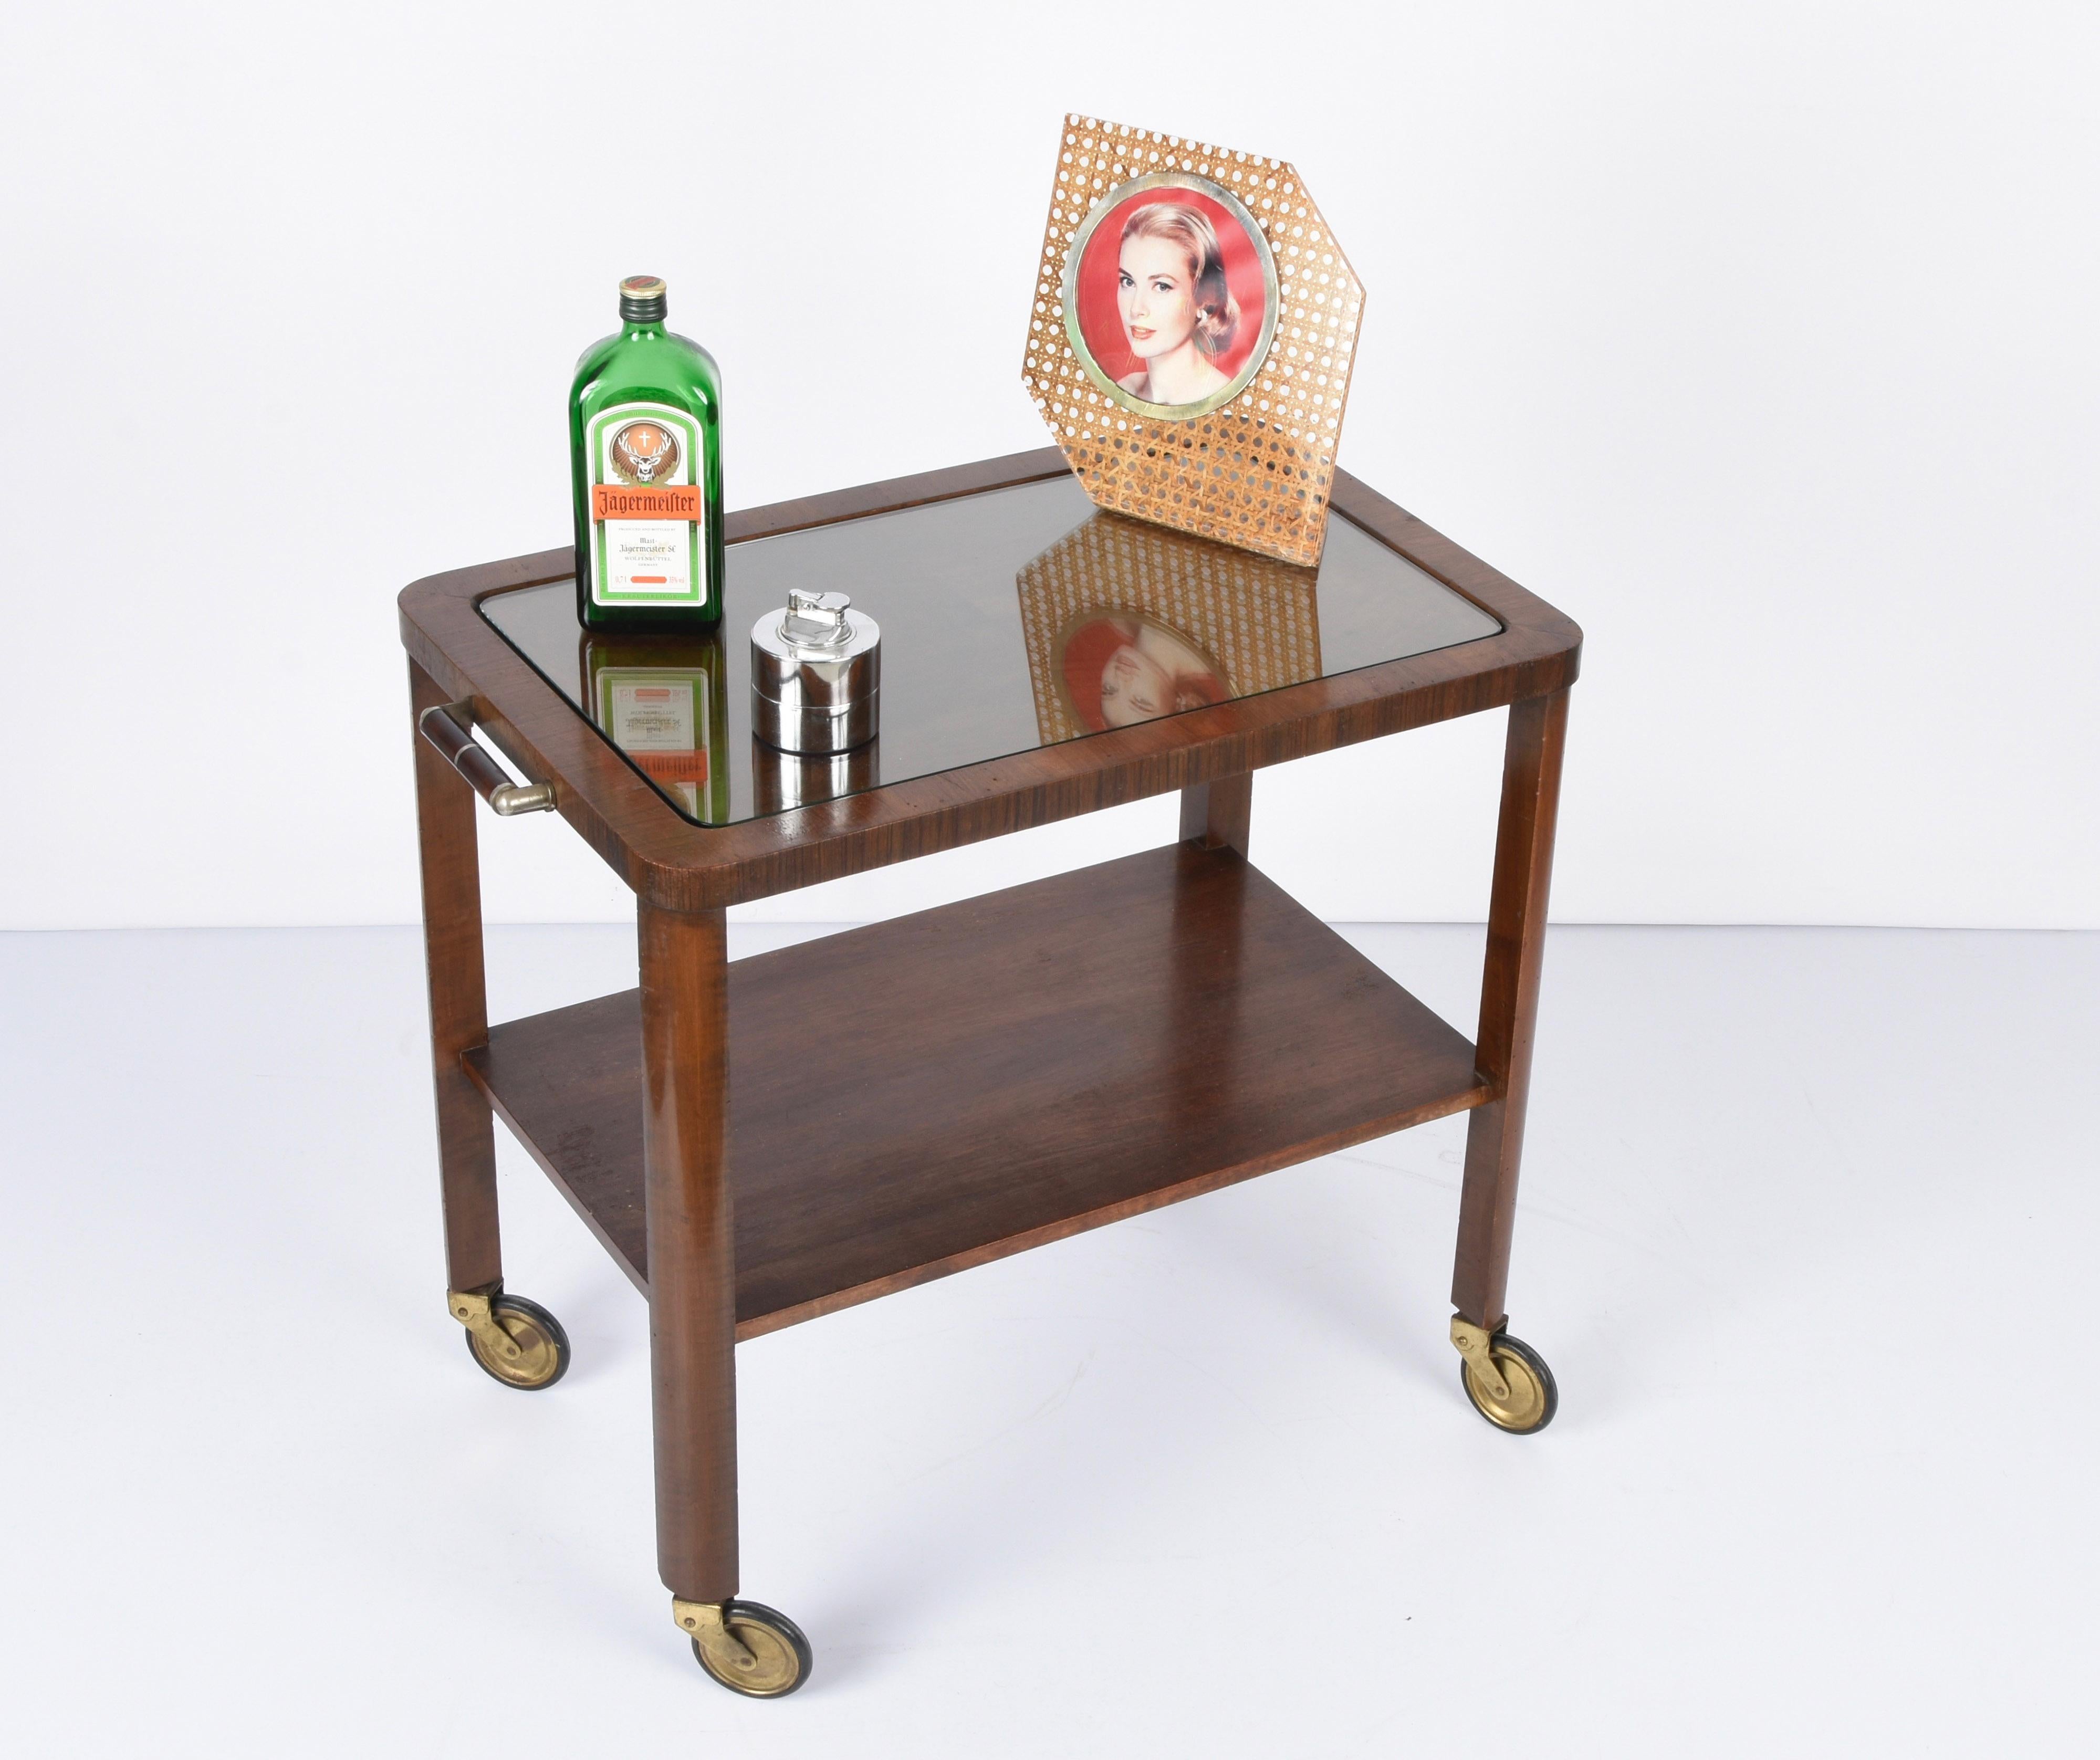 Art Deco Solid Walnut Wood and Glass Two-Levels Italian Trolley Bar Cart, 1940s For Sale 6